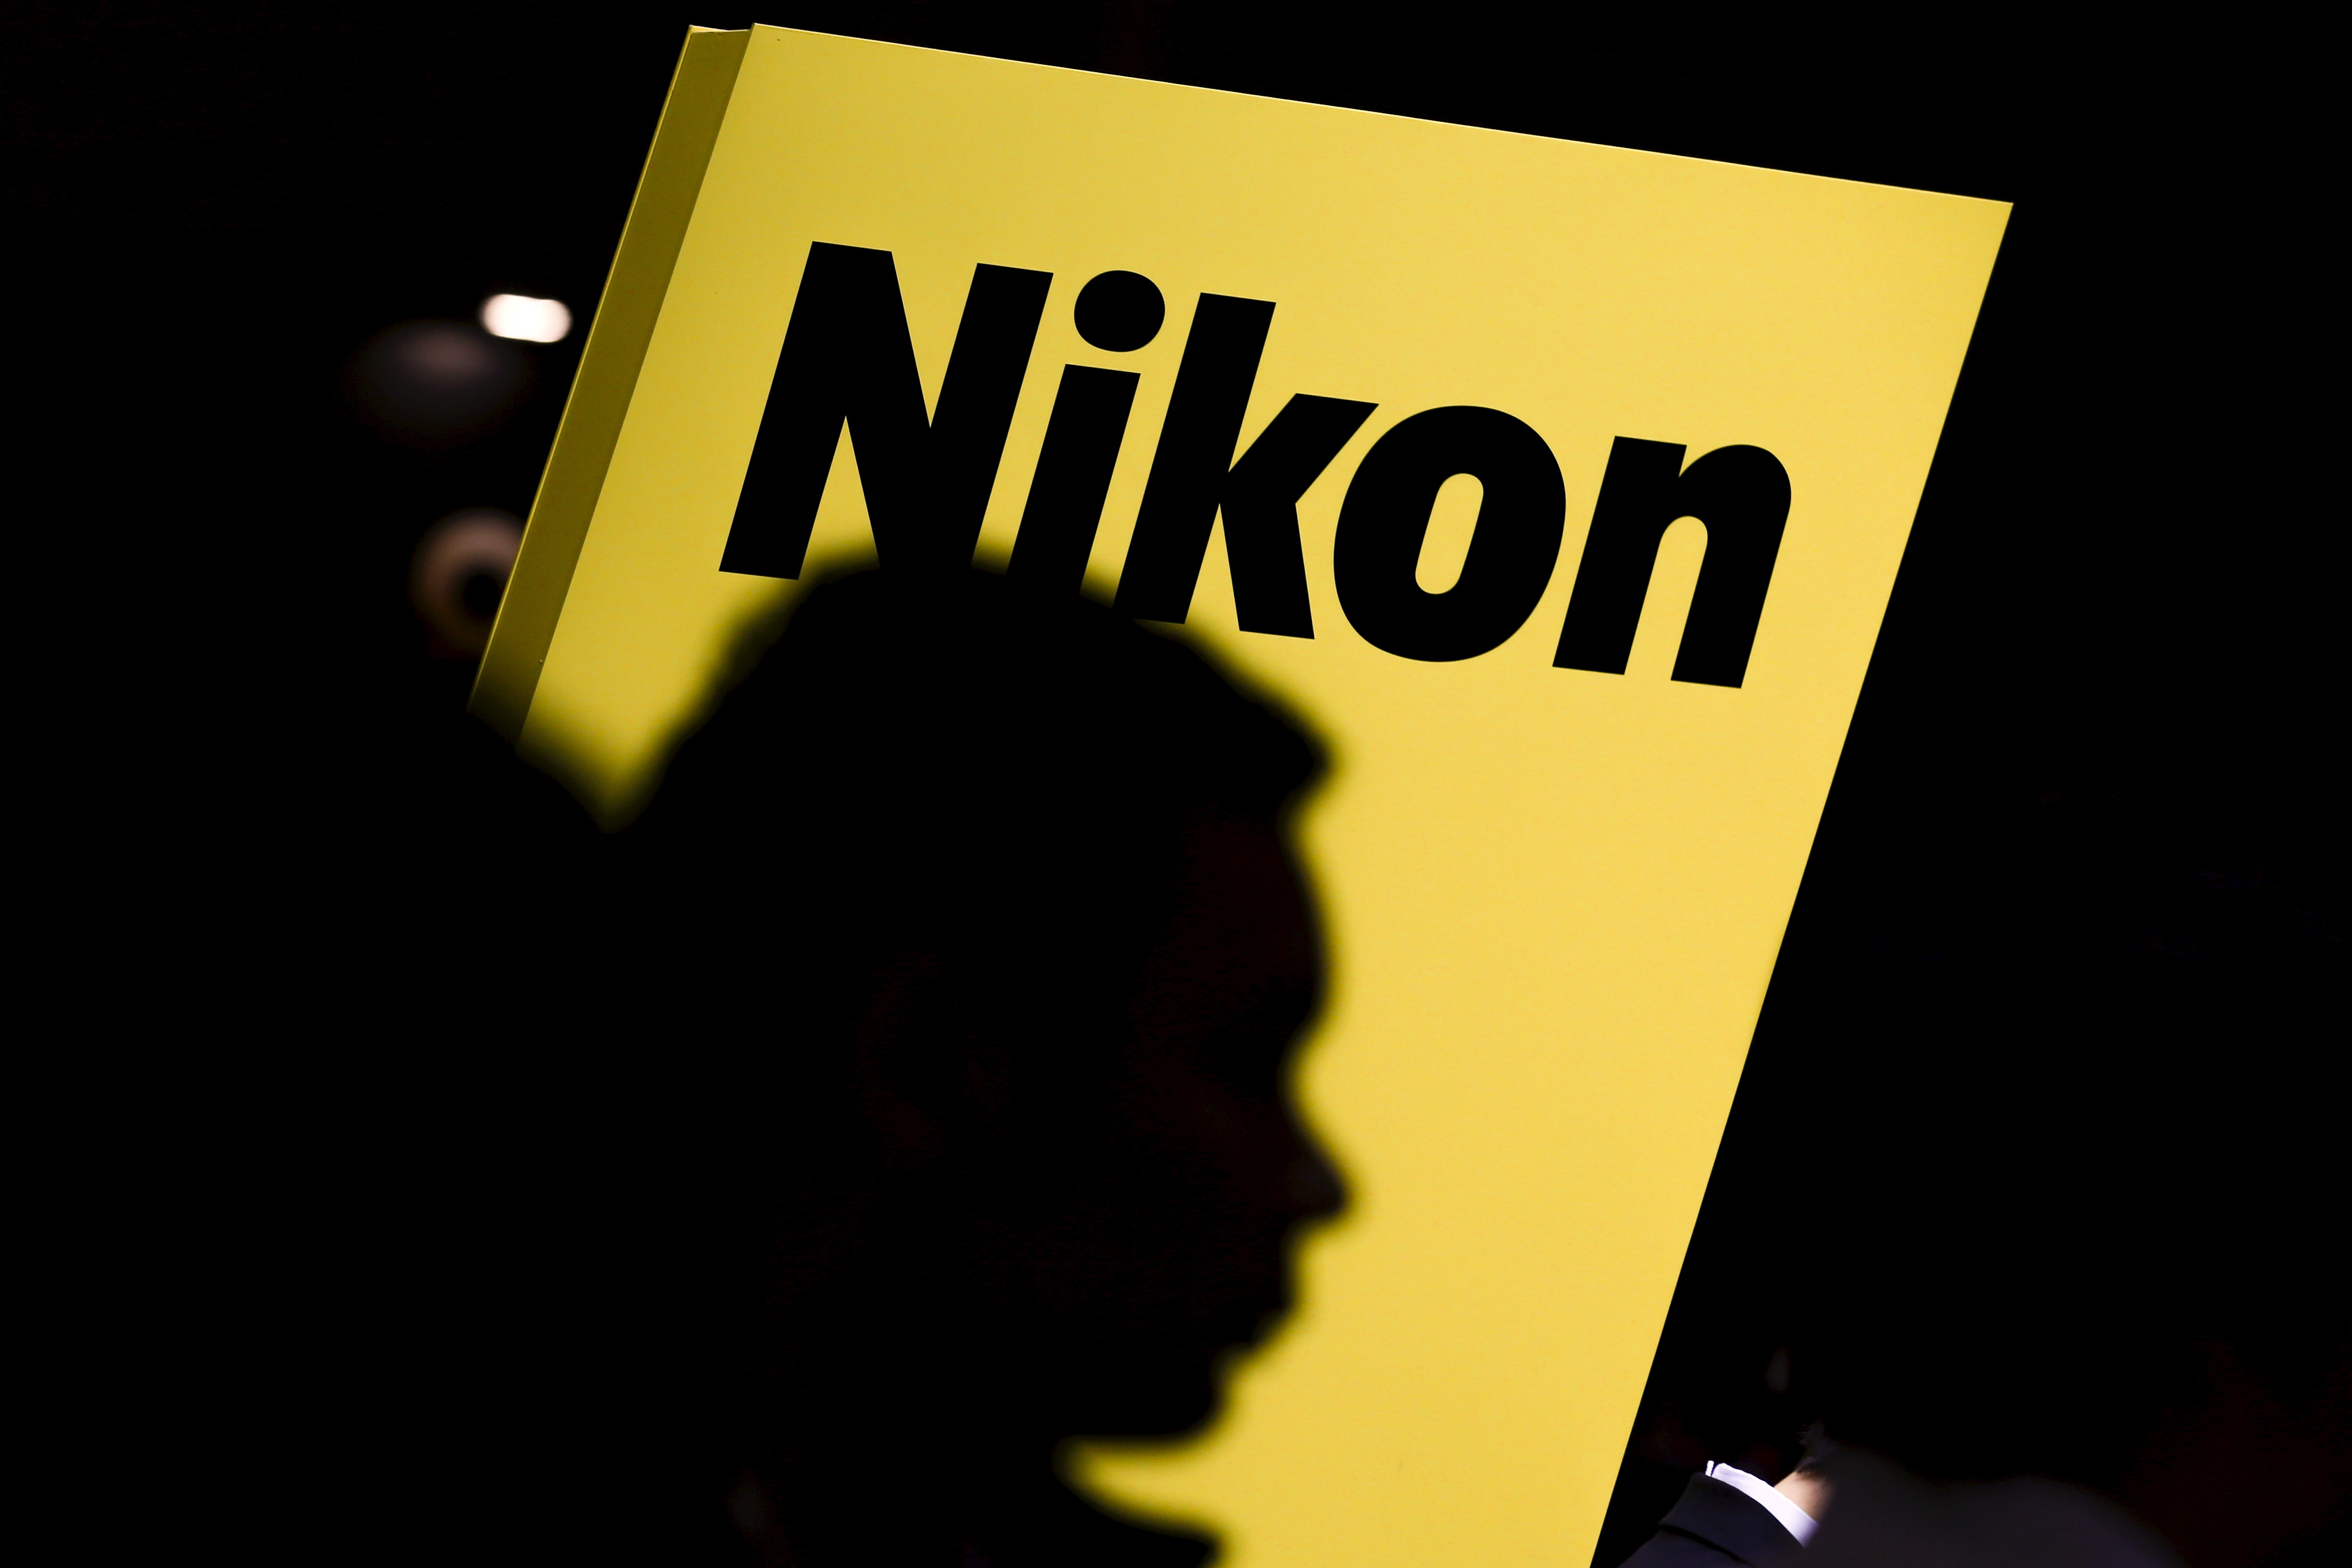 People are silhouetted against a display of the Nikon brand logo at the CP+ camera and photo trade fair in Yokohama